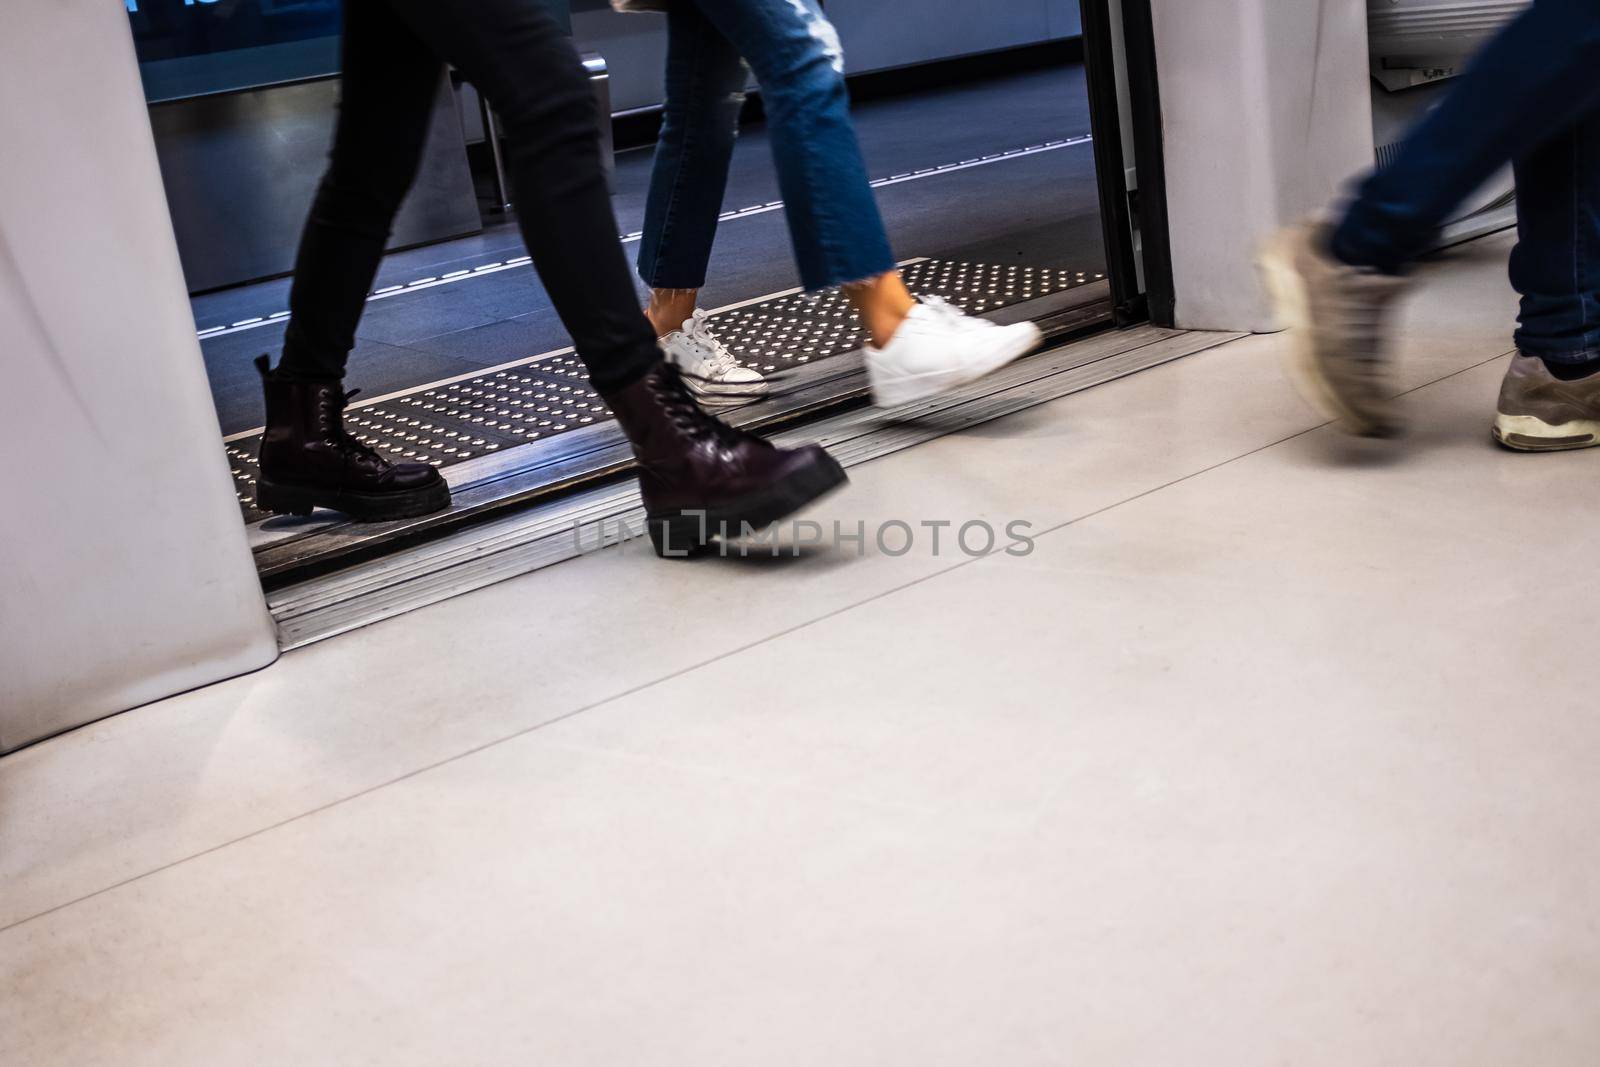 Motion blurred passengers entering wagon door on a subway station in Brescia (Lombardy, Italy). Tactile paving to guide blind people, installed at the edge of platform, is visible in background. Copy space for text.